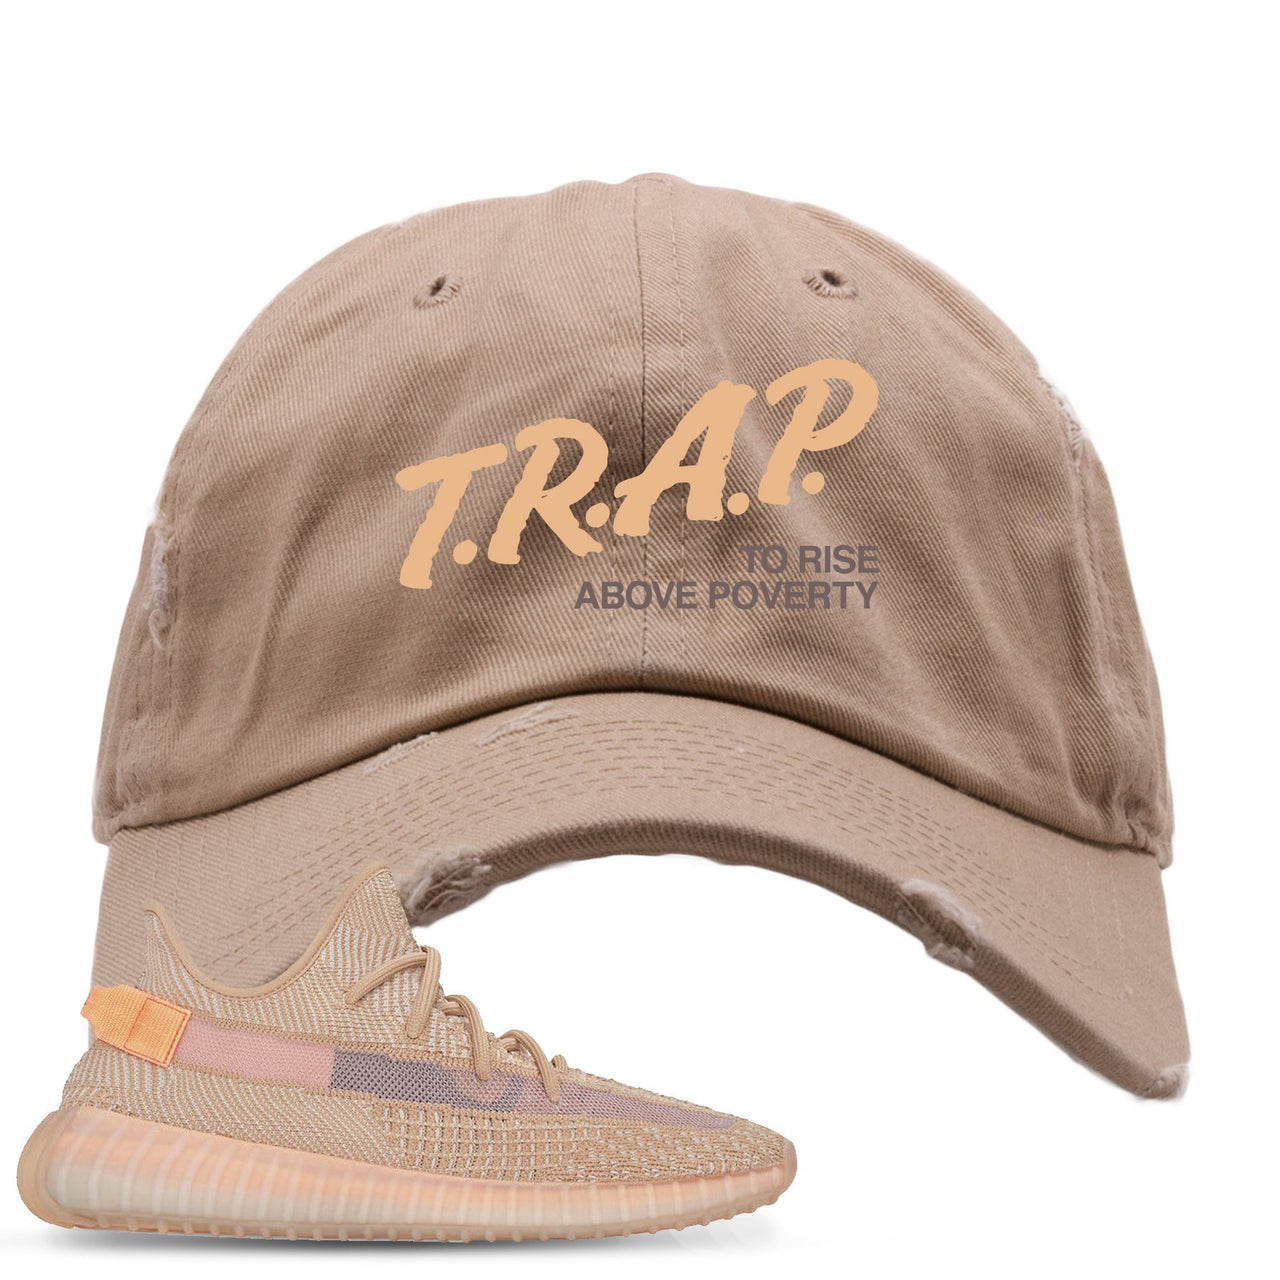 Clay v2 350s Distressed Dad Hat | Trap To Rise Above Poverty, Khaki